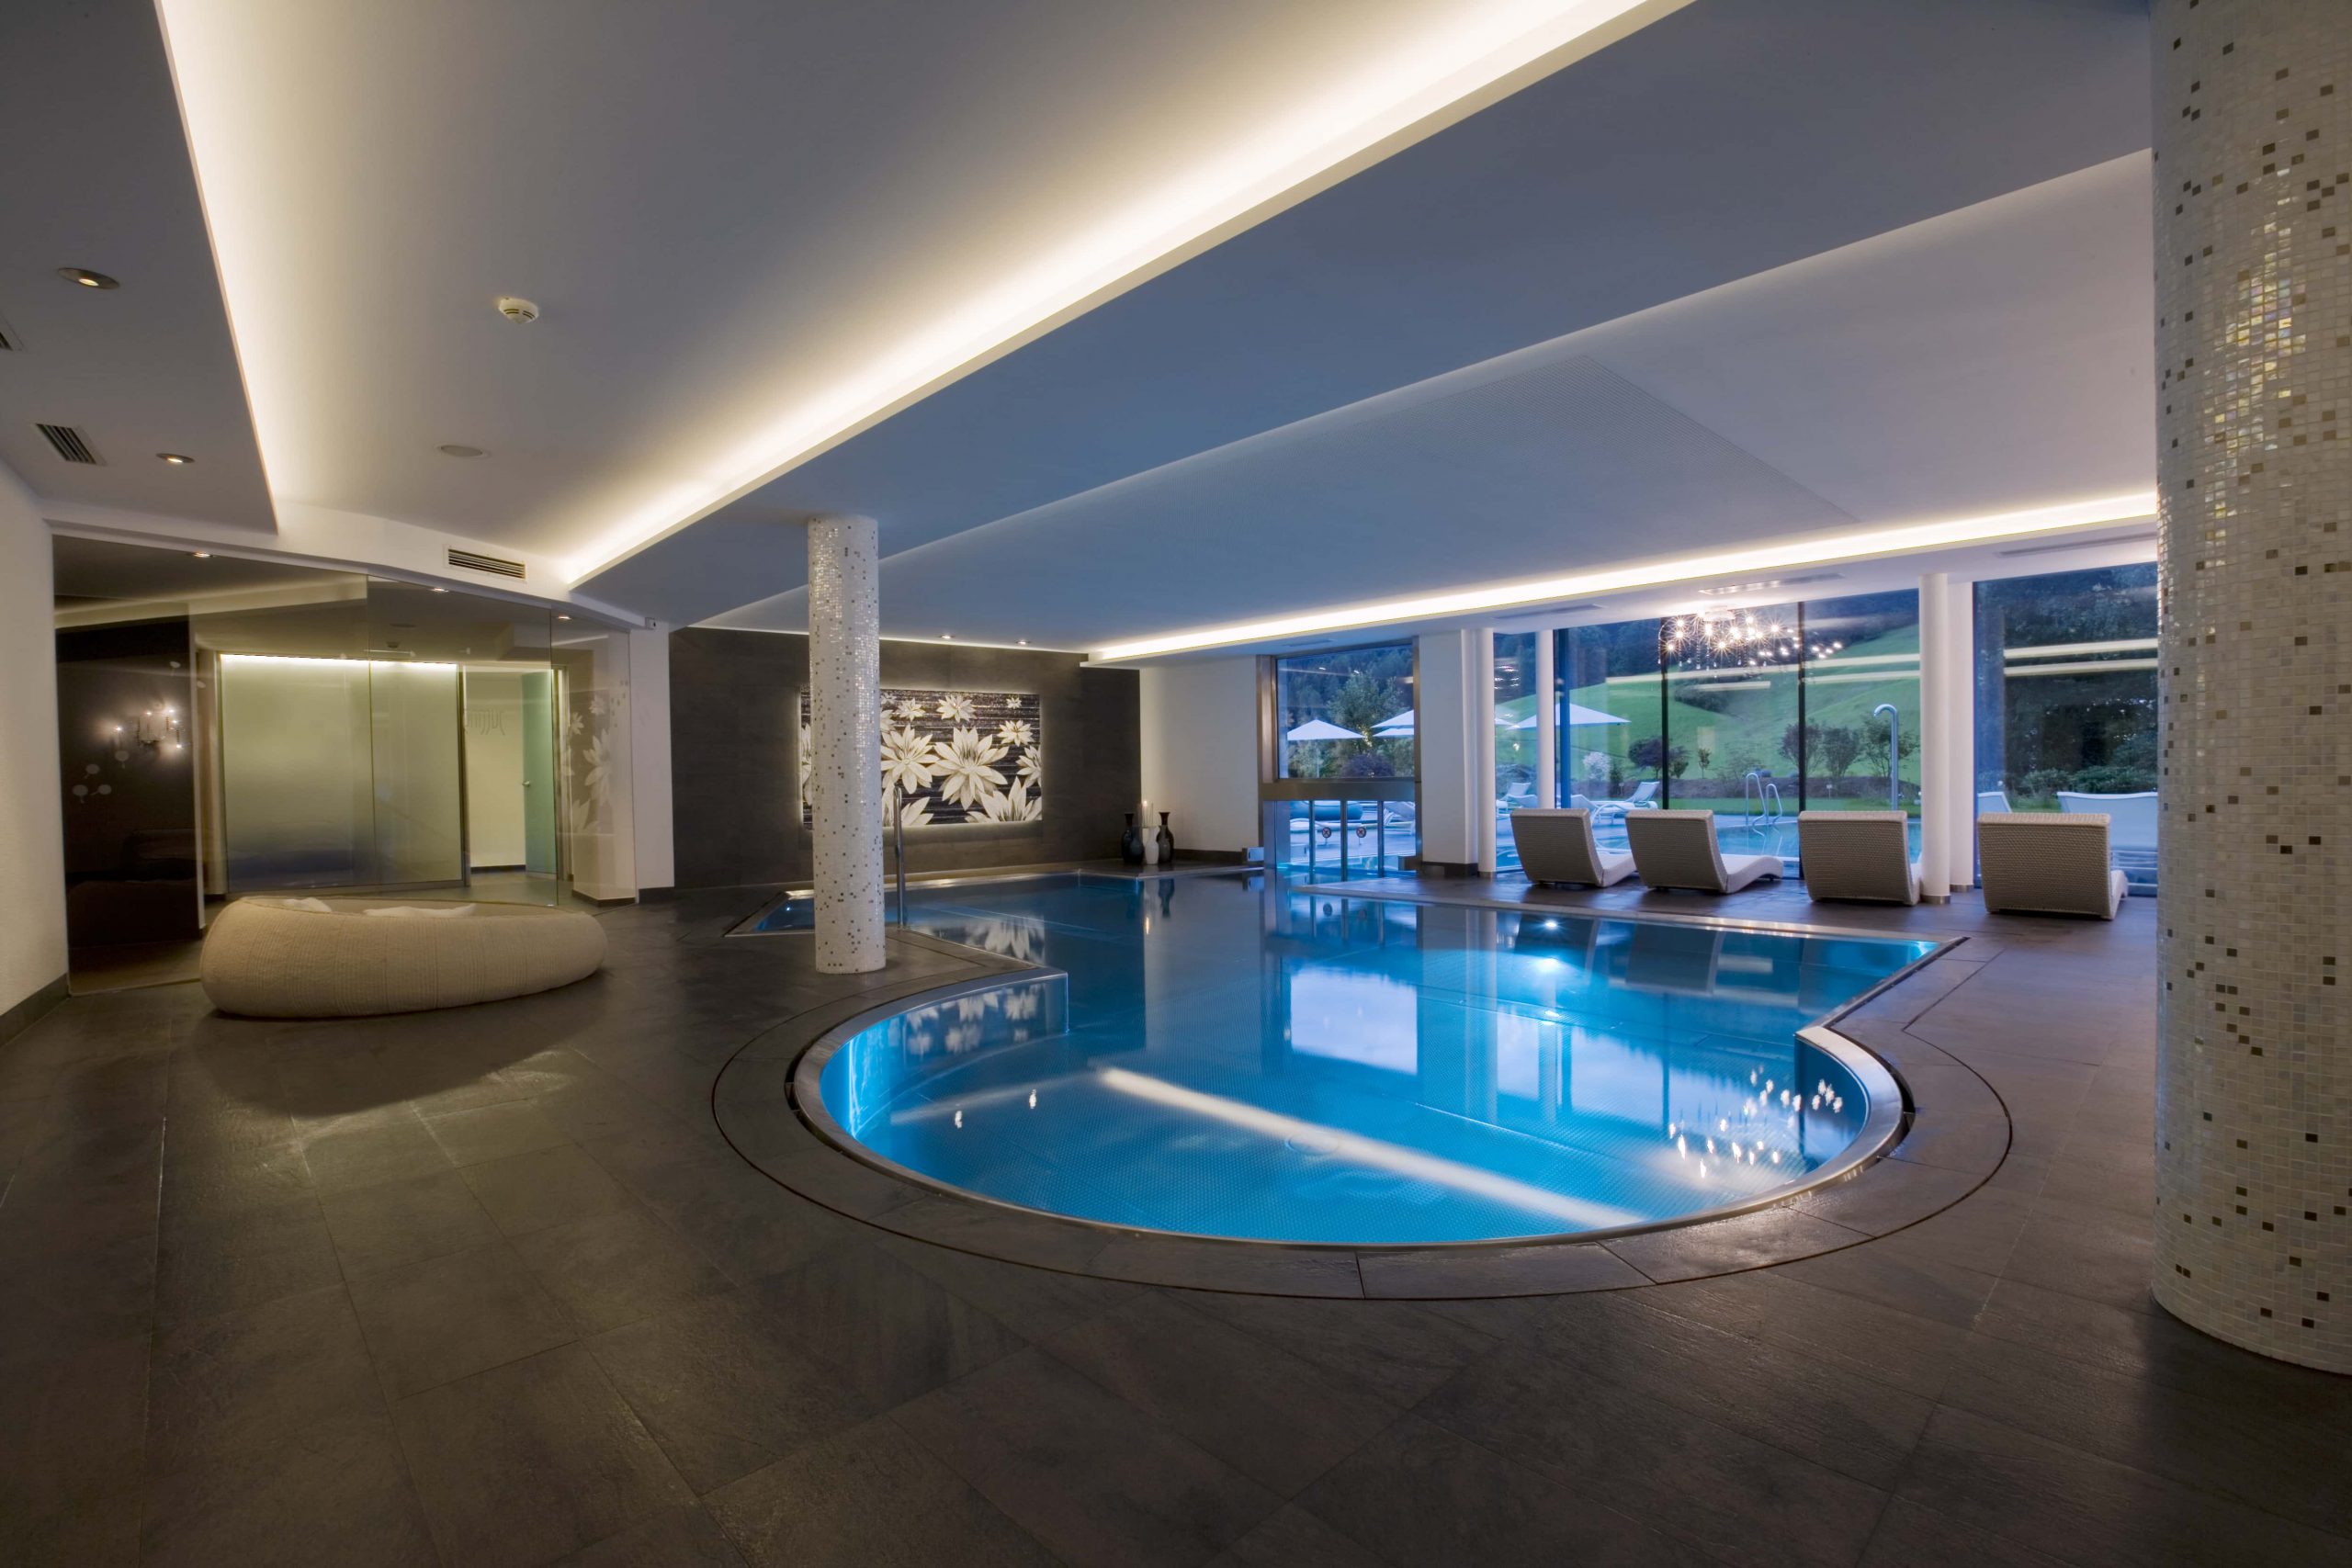 Luxury Bespoke Swimming Pools Bath Indoor Circular Hotel UK Manufacturer Design Installation Stainless Steel Refurbishment Commercial Infinity Indoor Outdoor Engineered Made to Measure Level Deck Skimmer Private Competitive Swimmer Lap Steam Sauna Rooms Spa Whirlpool